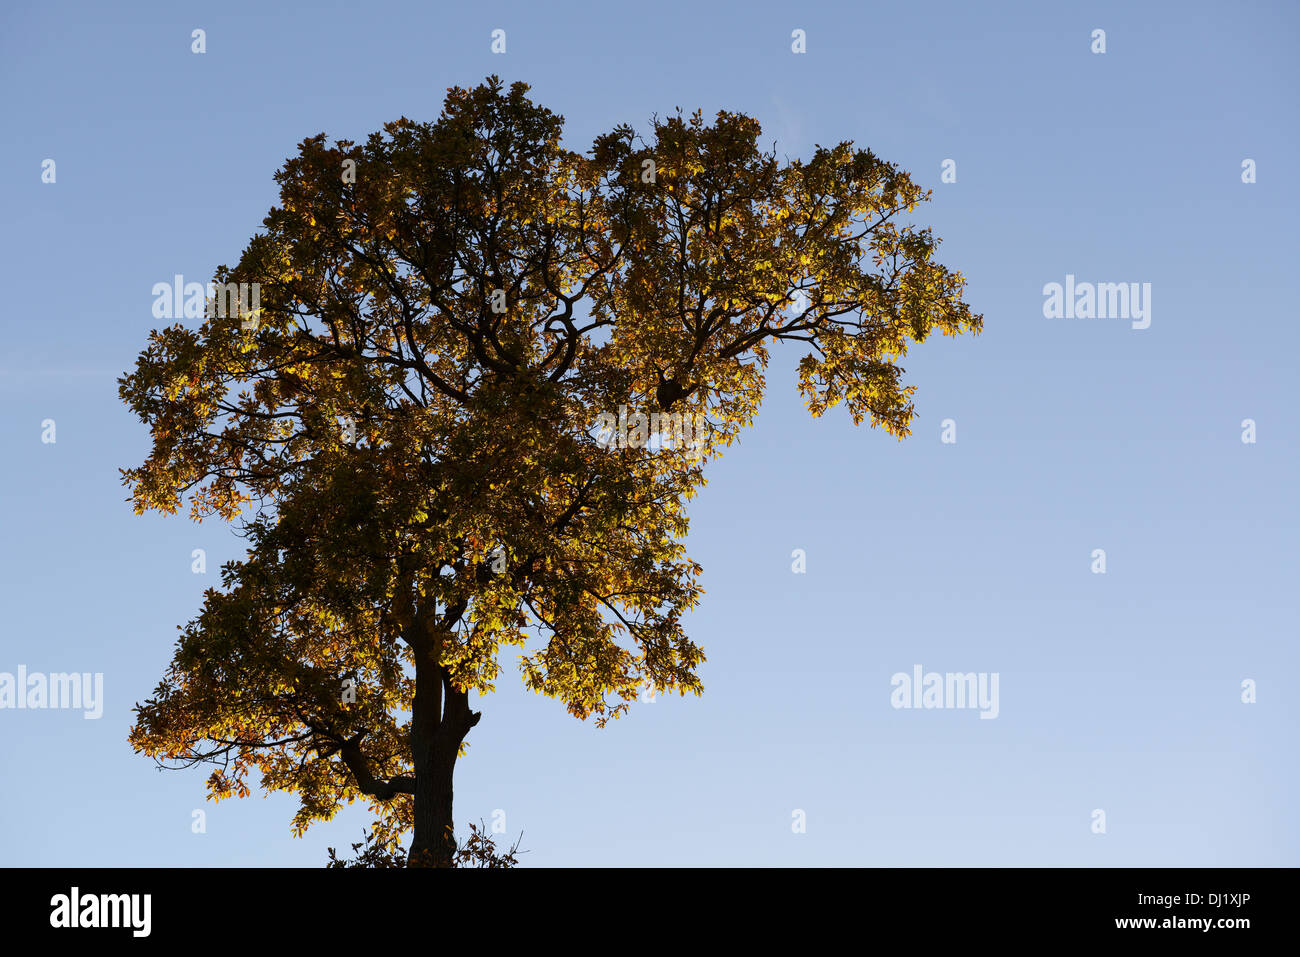 oak tree branches against a blue sky Stock Photo